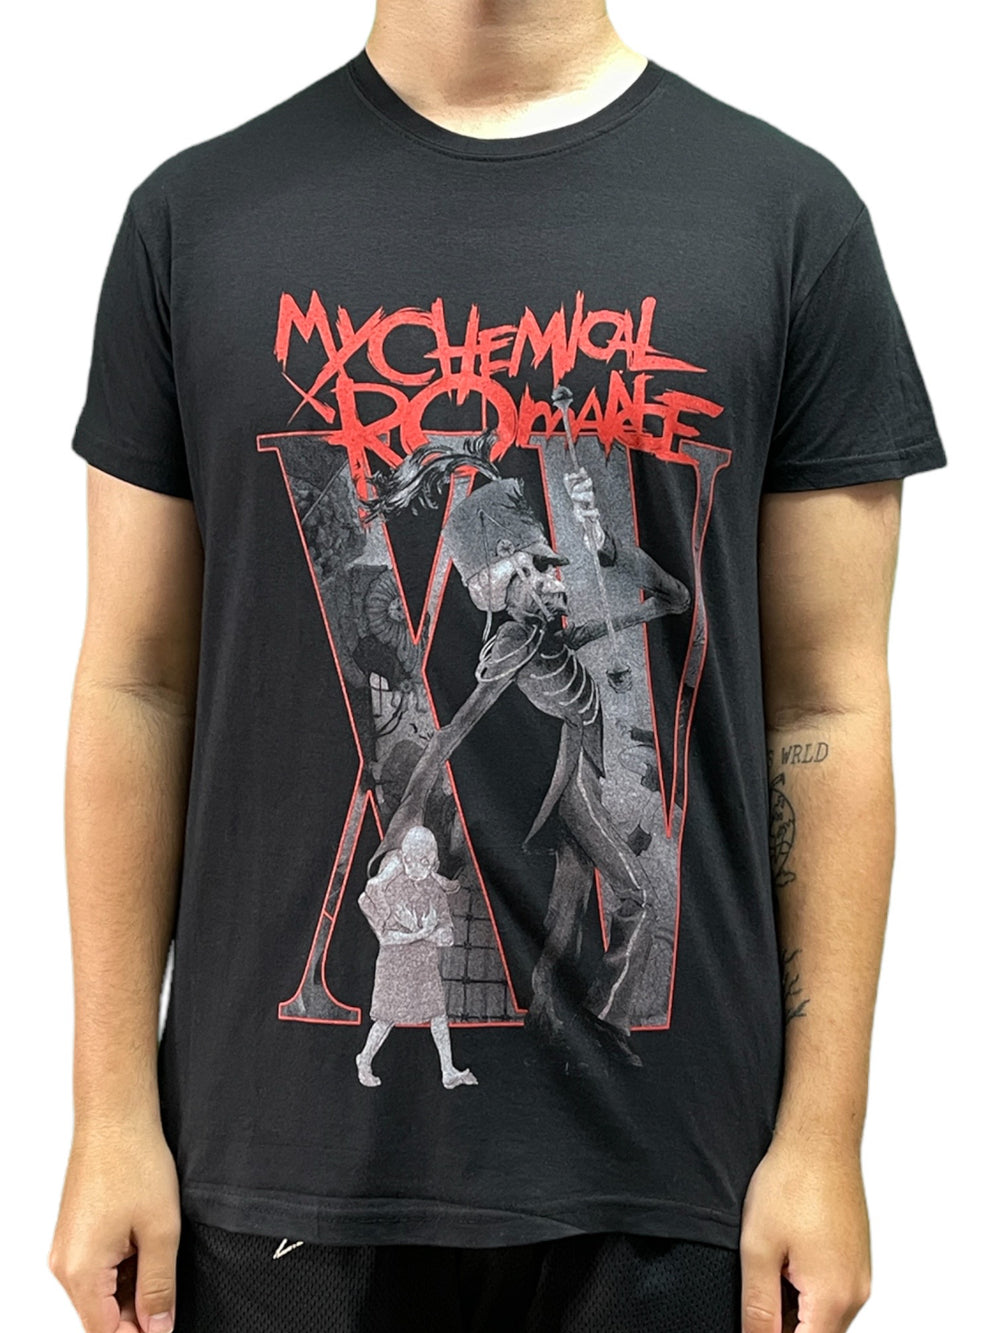 My Chemical Romance - XV PARADE FILL Official Unisex T Shirt Various Sizes new